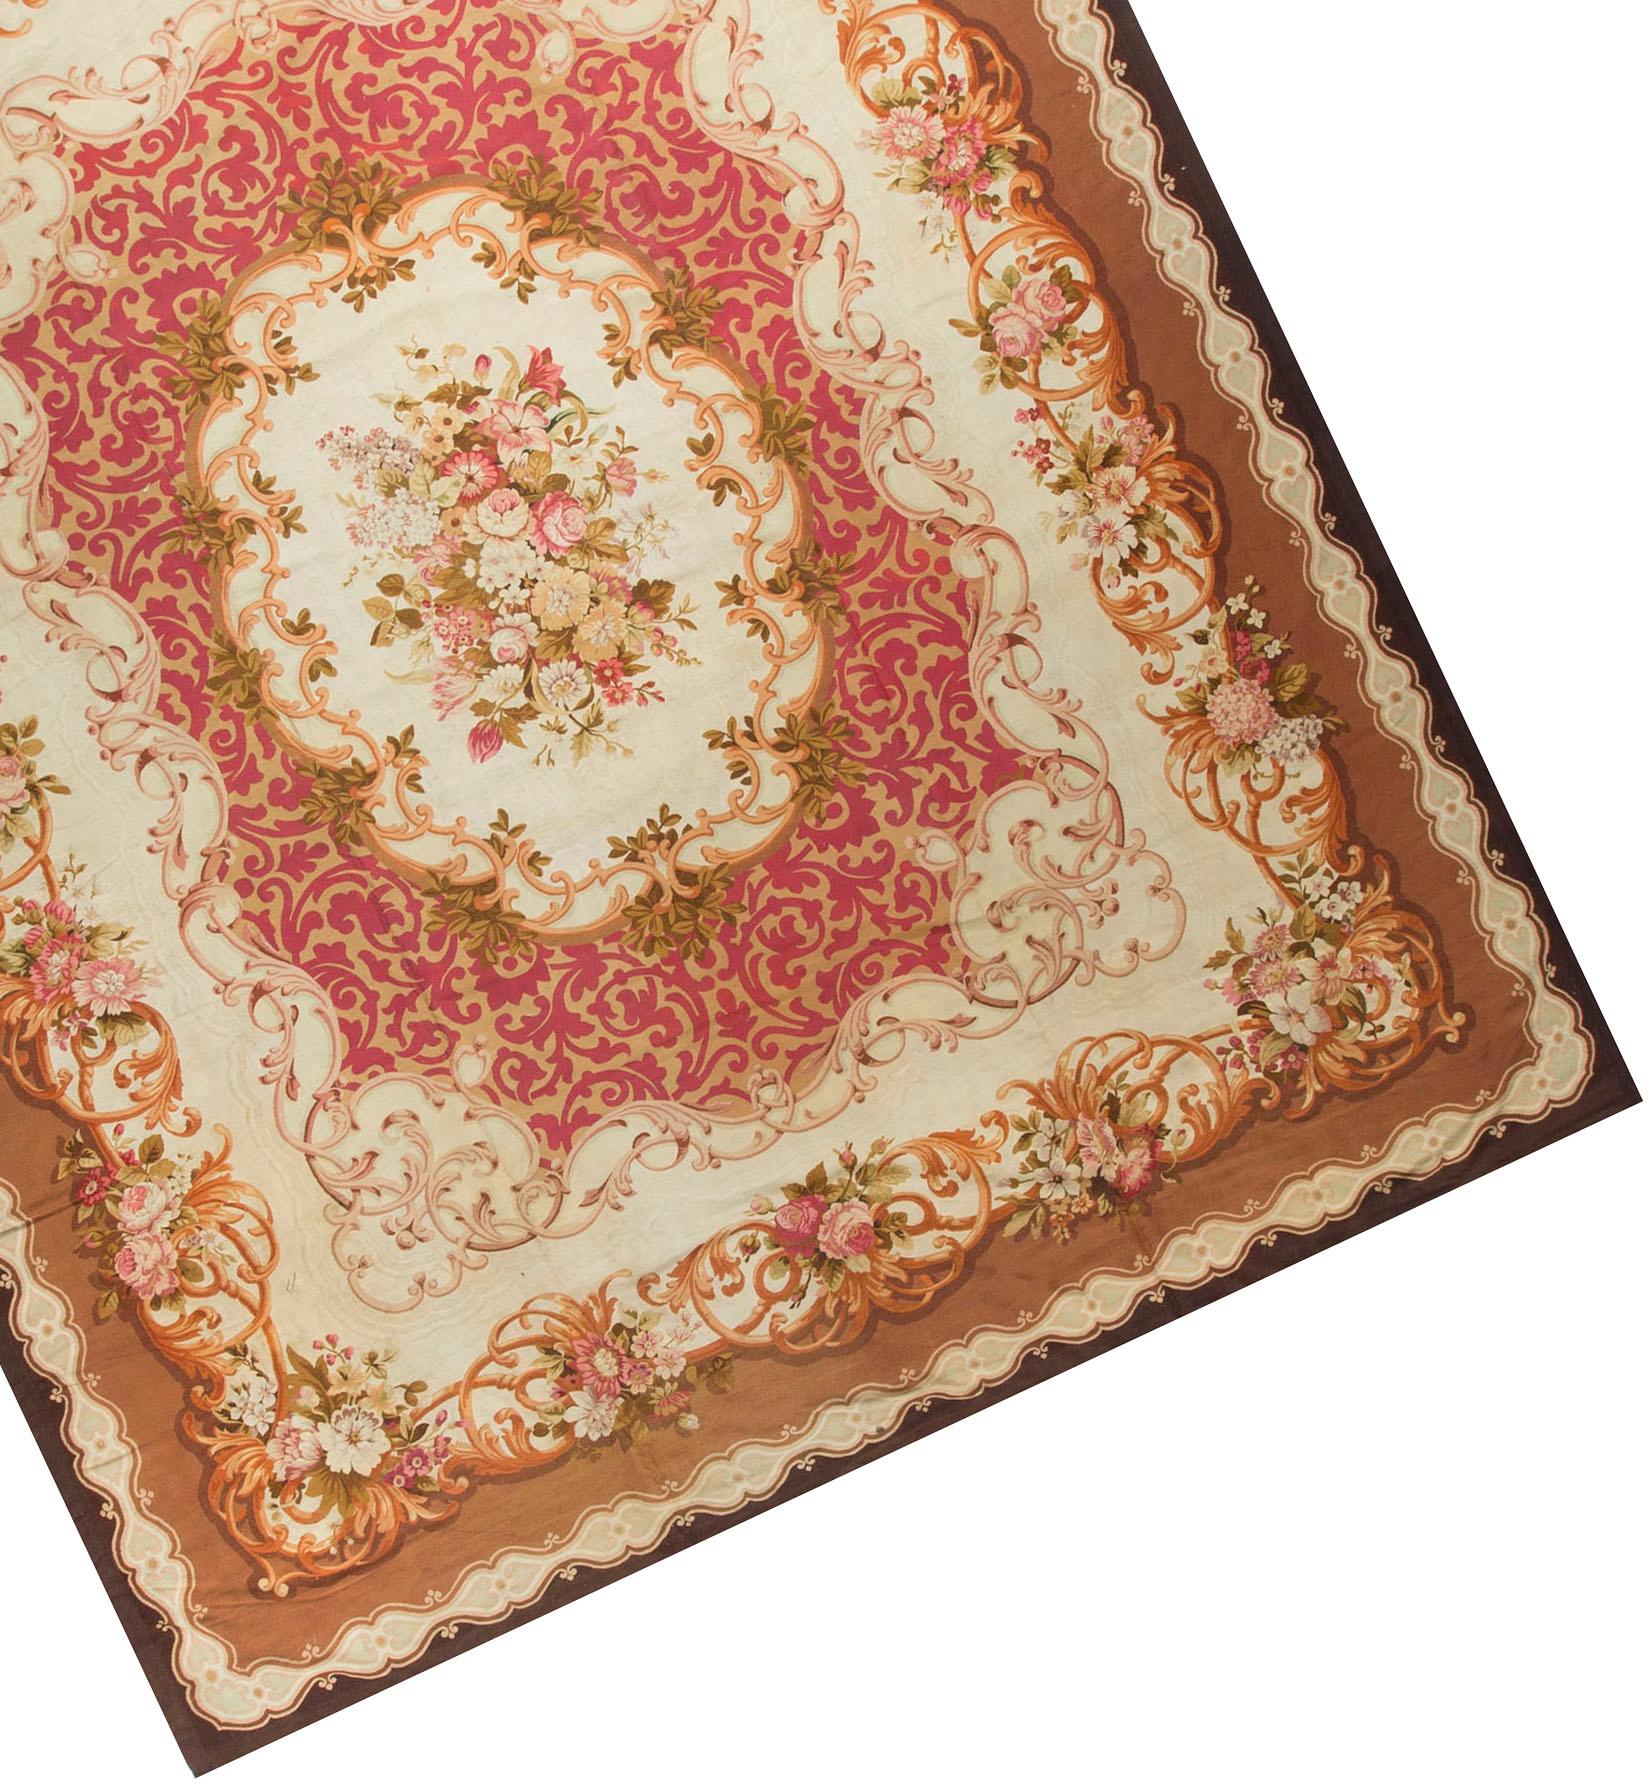 Antique French Aubusson Rug Carpet, circa 1890 In Good Condition For Sale In Secaucus, NJ